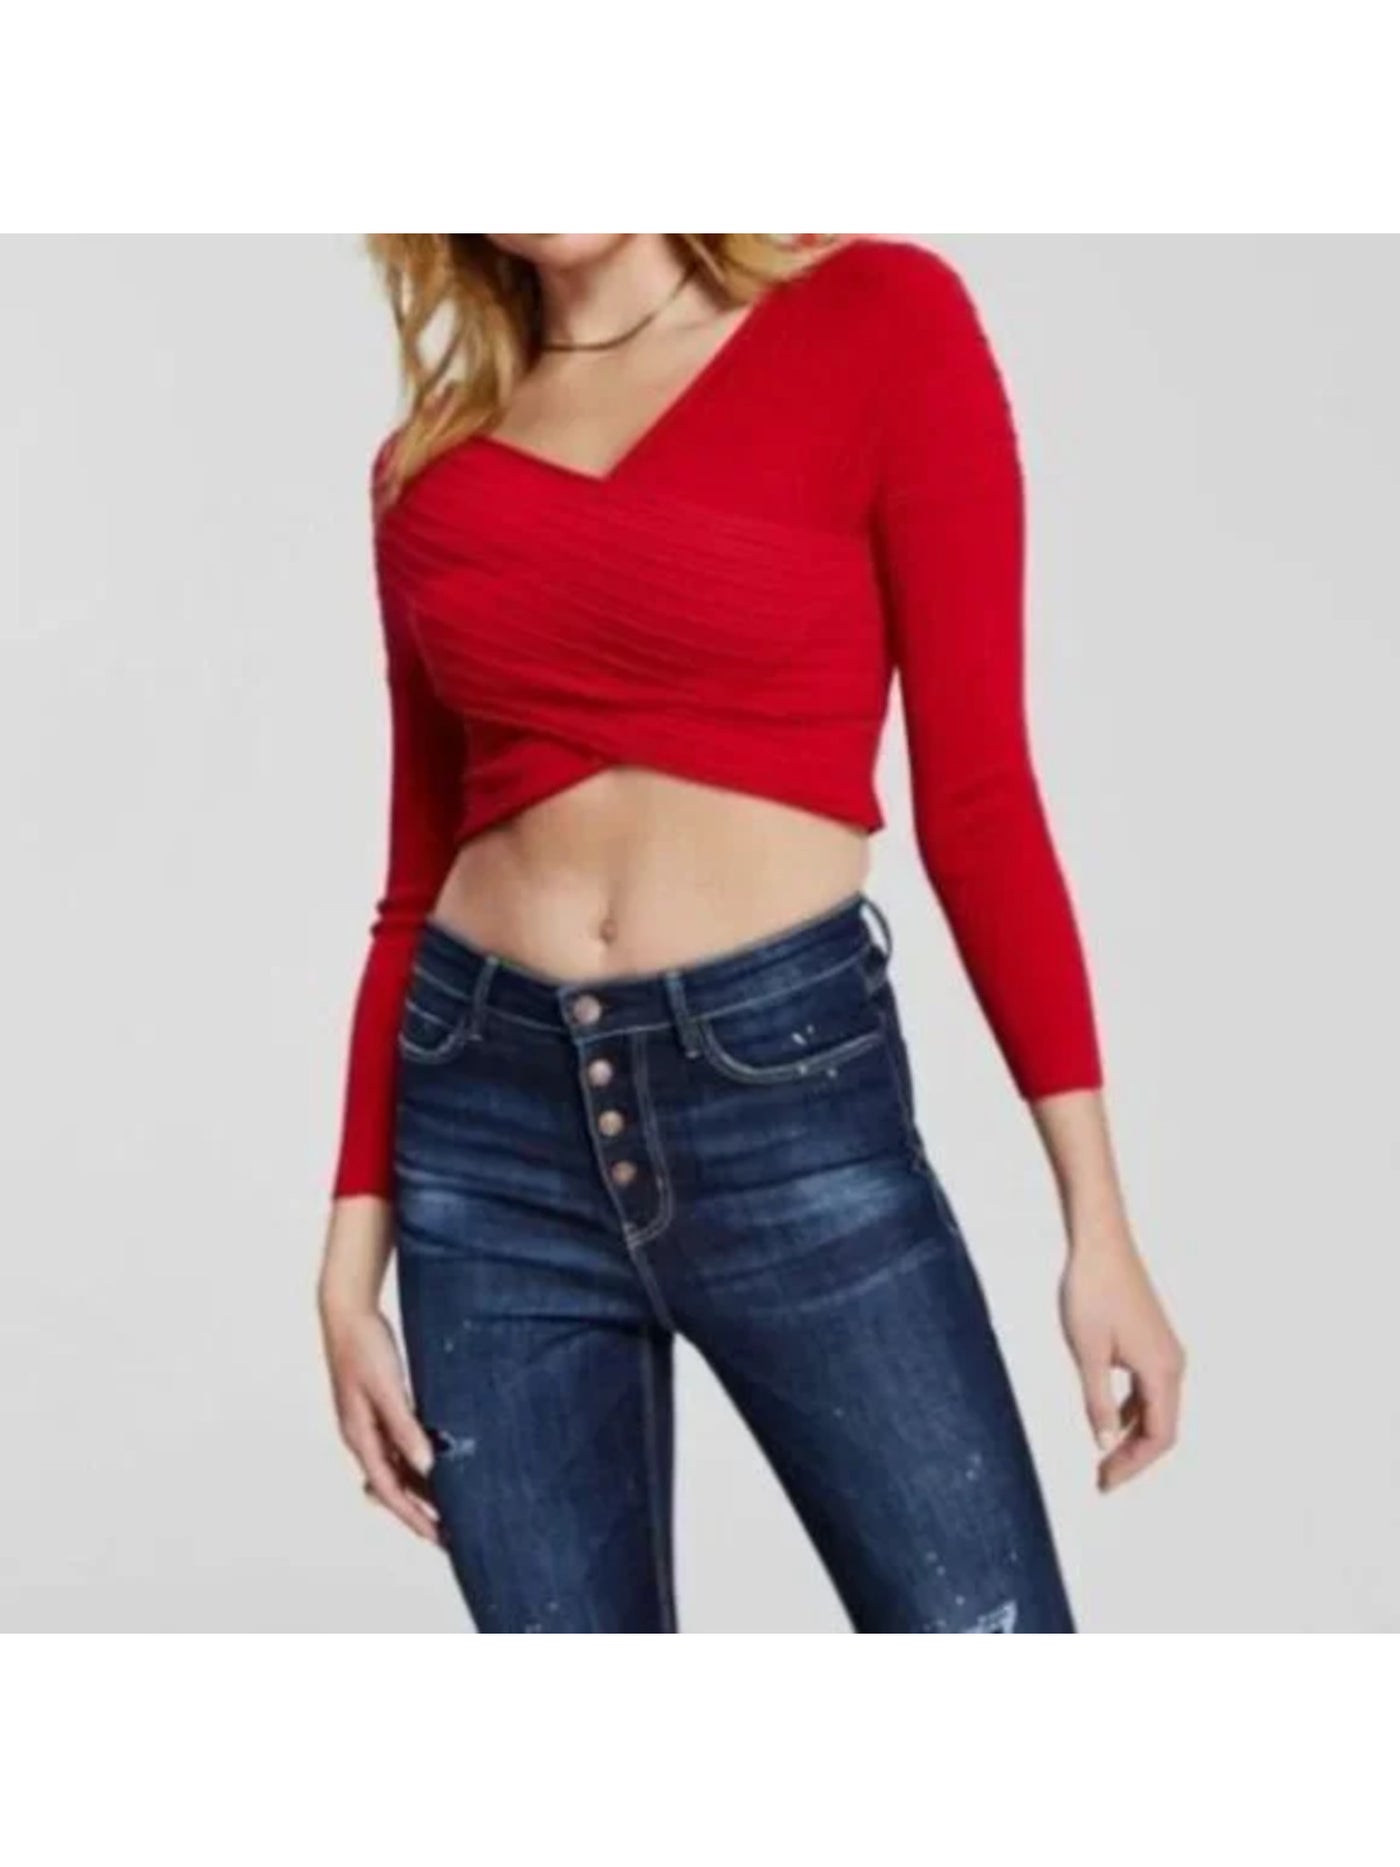 GUESS Womens Red Ribbed Crisscross Front Long Sleeve Off Shoulder Evening Crop Top Sweater XL